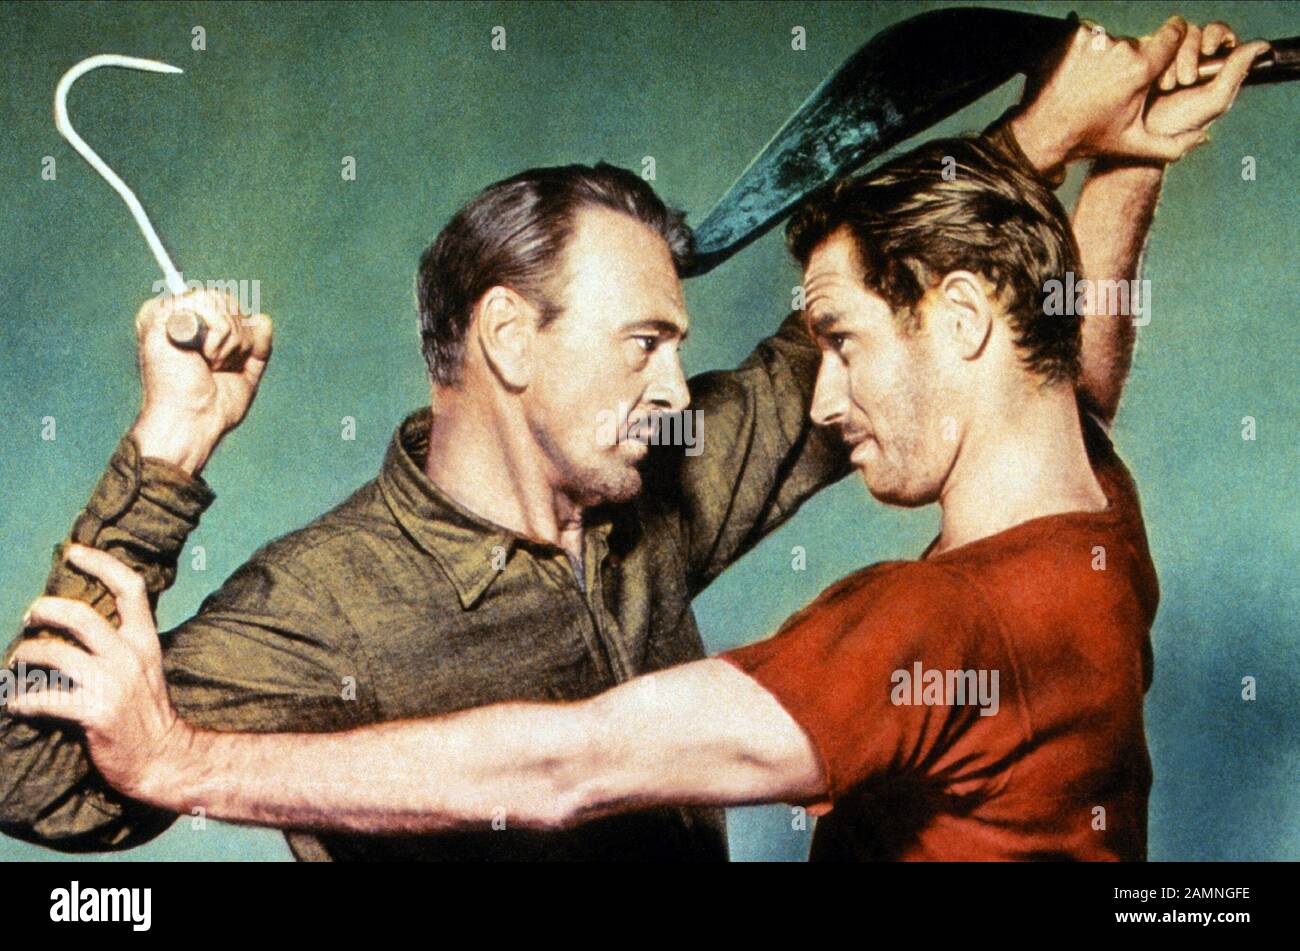 COOPER,HESTON, THE WRECK OF THE MARY DEARE, 1959 Stock Photo